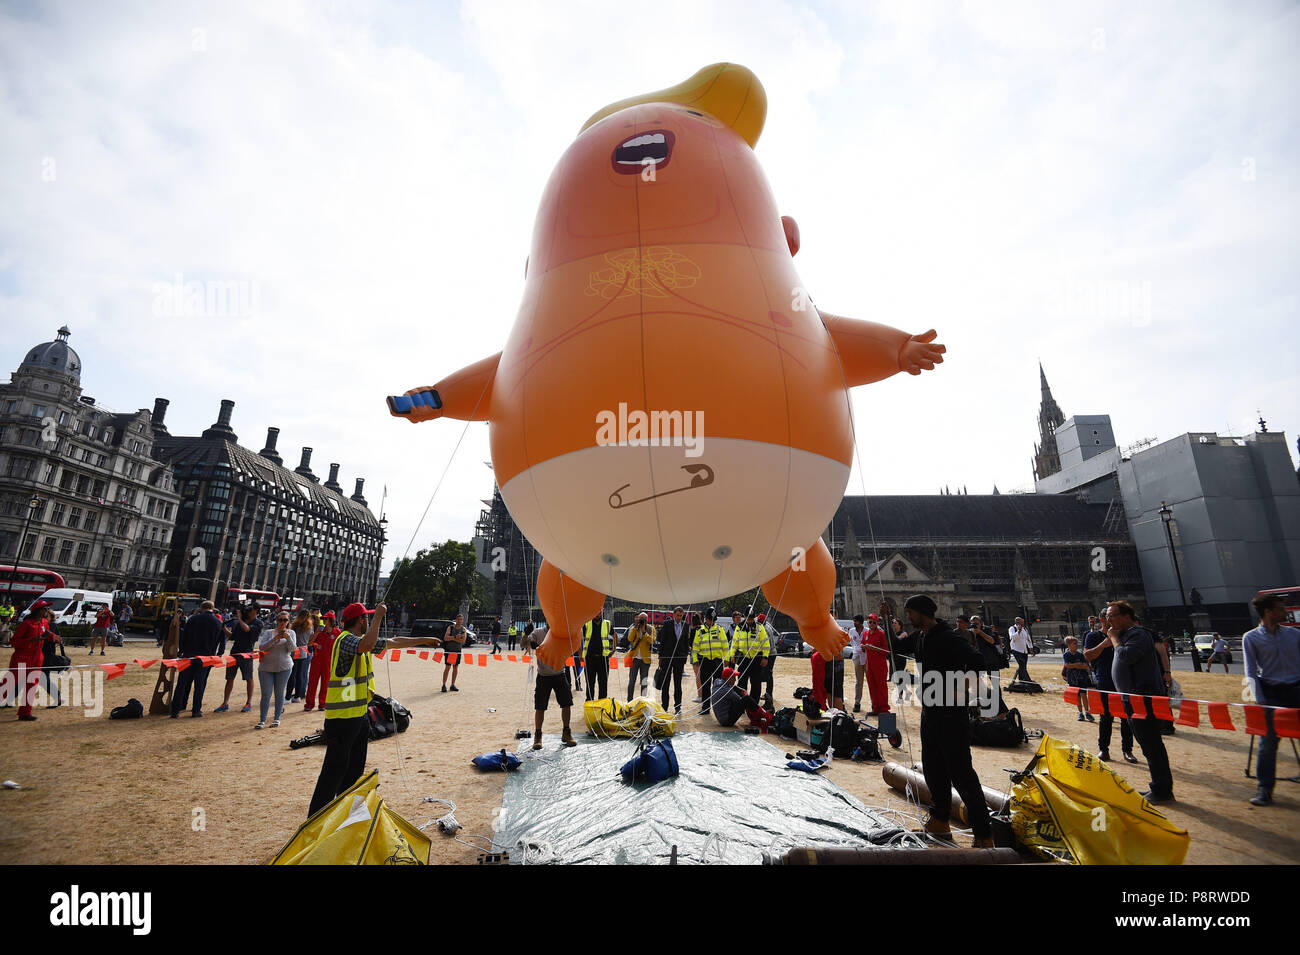 A 'Baby Trump' balloon rises after being inflated in London's Parliament Square, as part of the protests against the visit of US President Donald Trump to the UK. Stock Photo